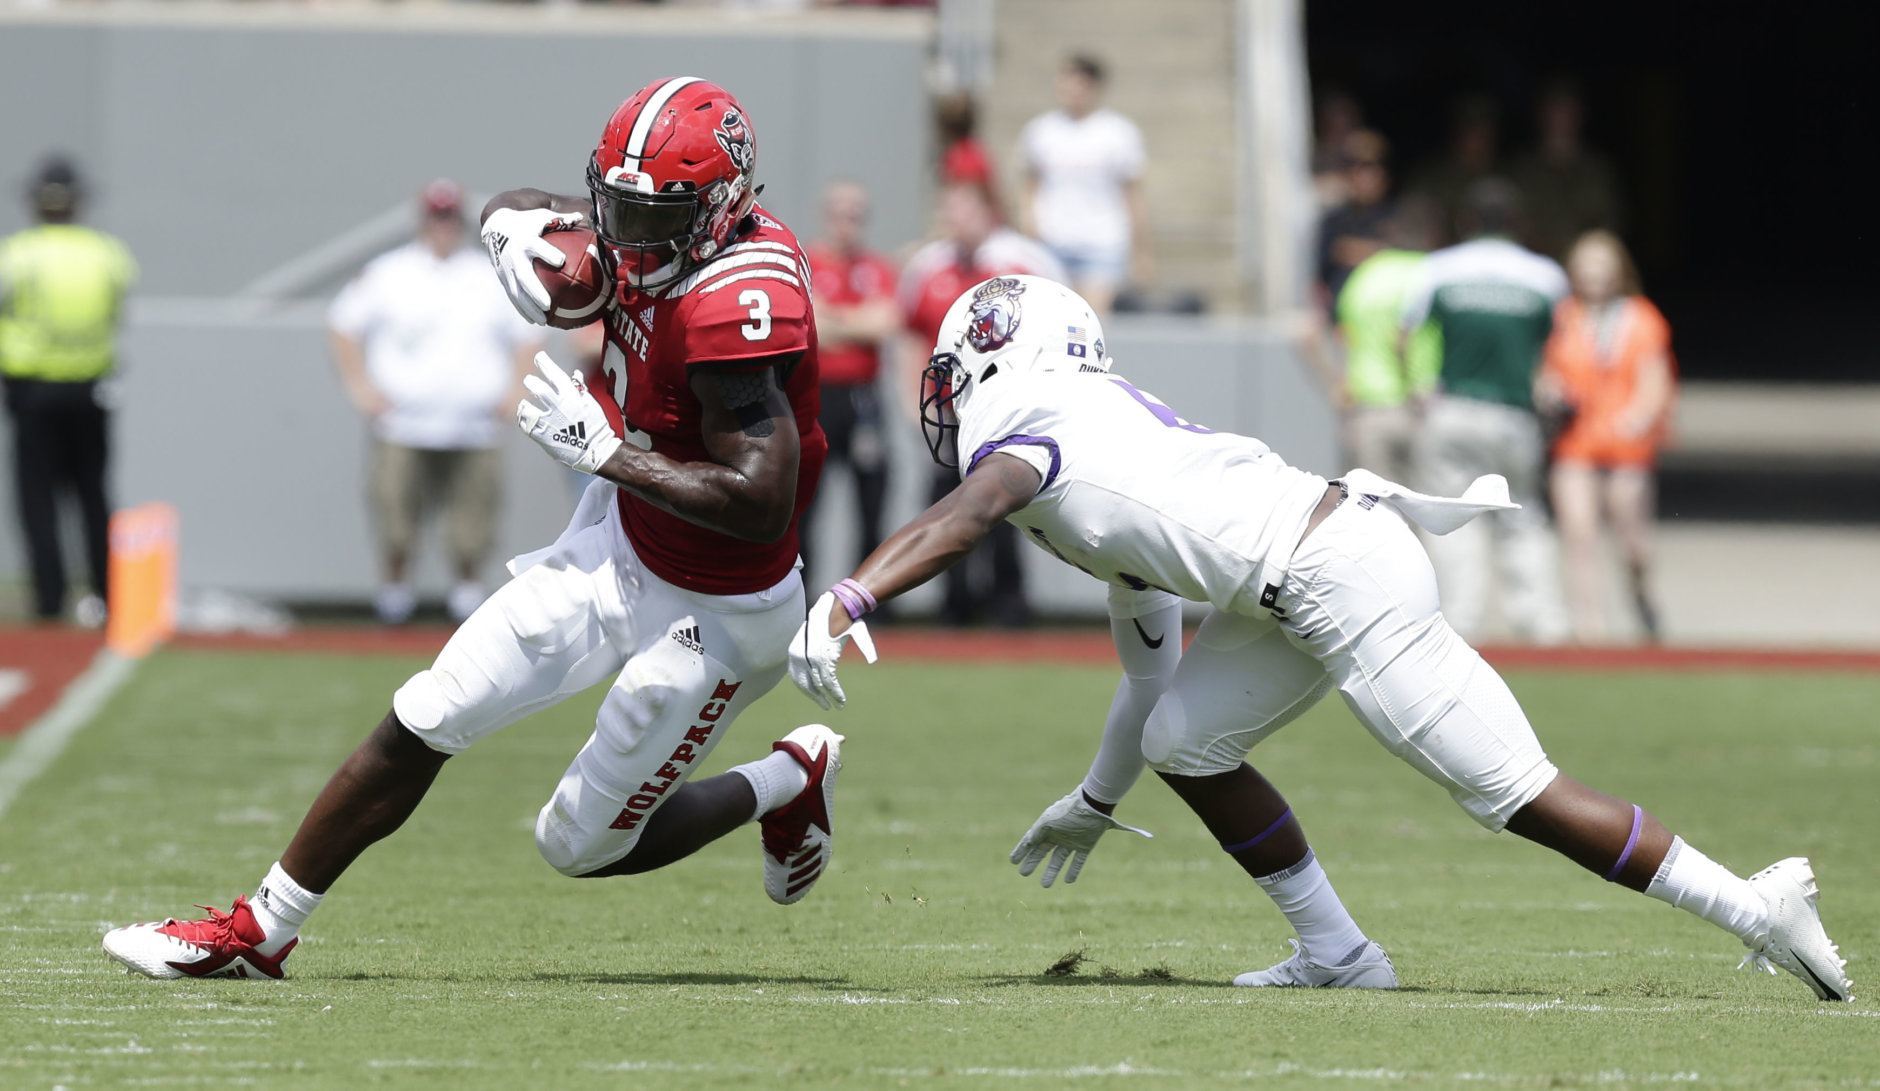 North Carolina State's Kelvin Harmon (3) runs the ball while James Madison's Jimmy Moreland dives for the tackle during the first half an NCAA college football game in Raleigh, N.C., Saturday, Sept. 1, 2018. (AP Photo/Gerry Broome)